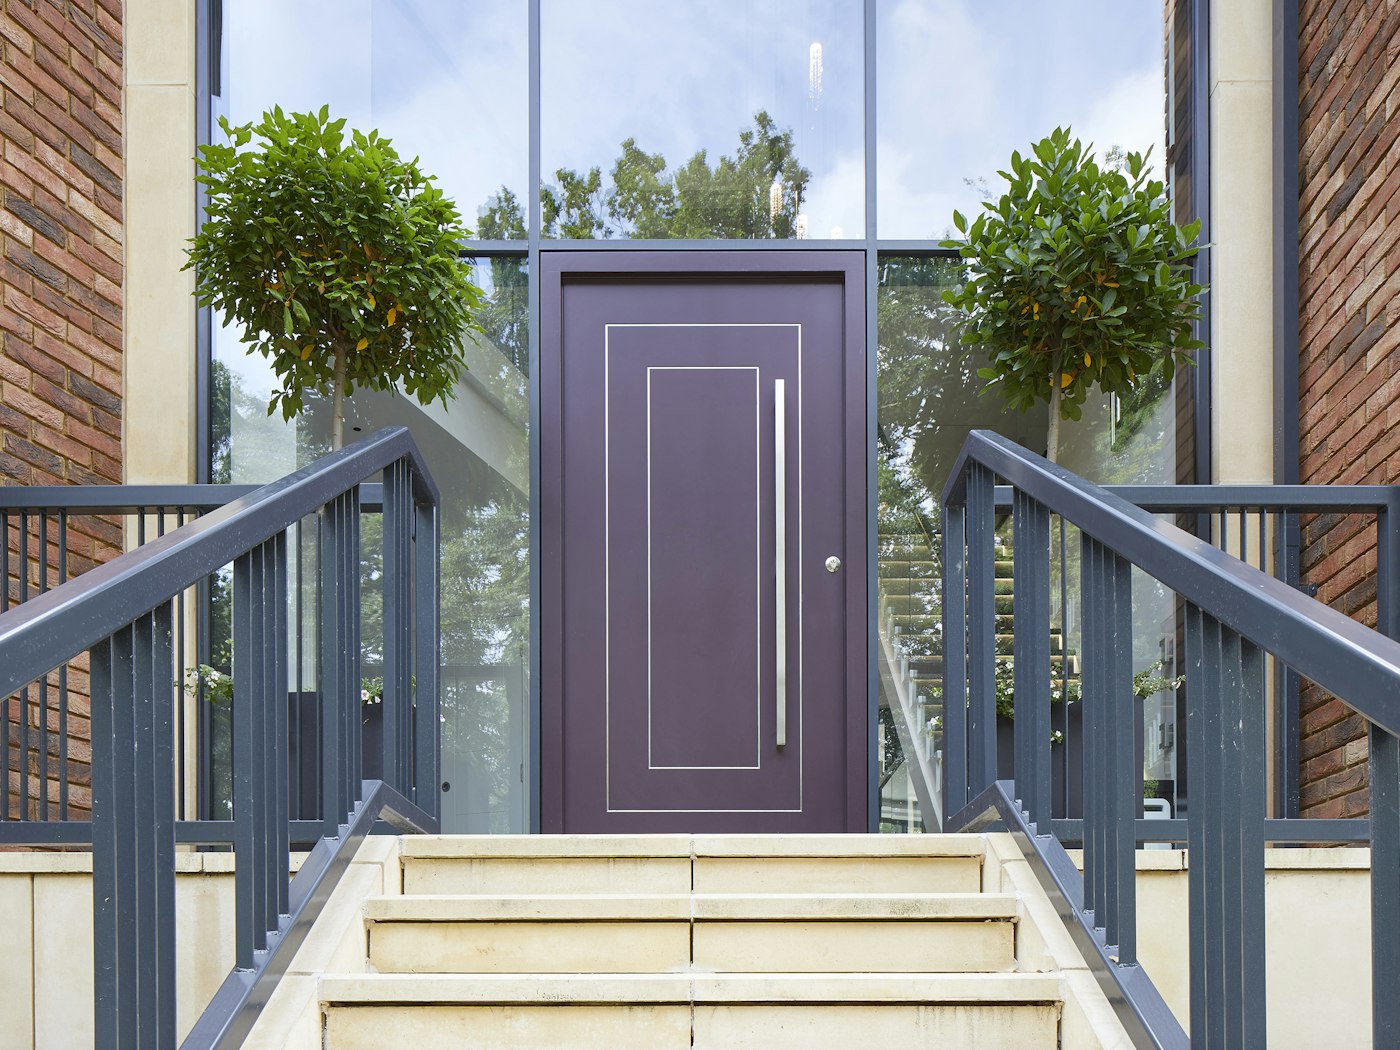 The black aluminium walling, red brick and beige tones of the exterior balance beautifully with the purple door